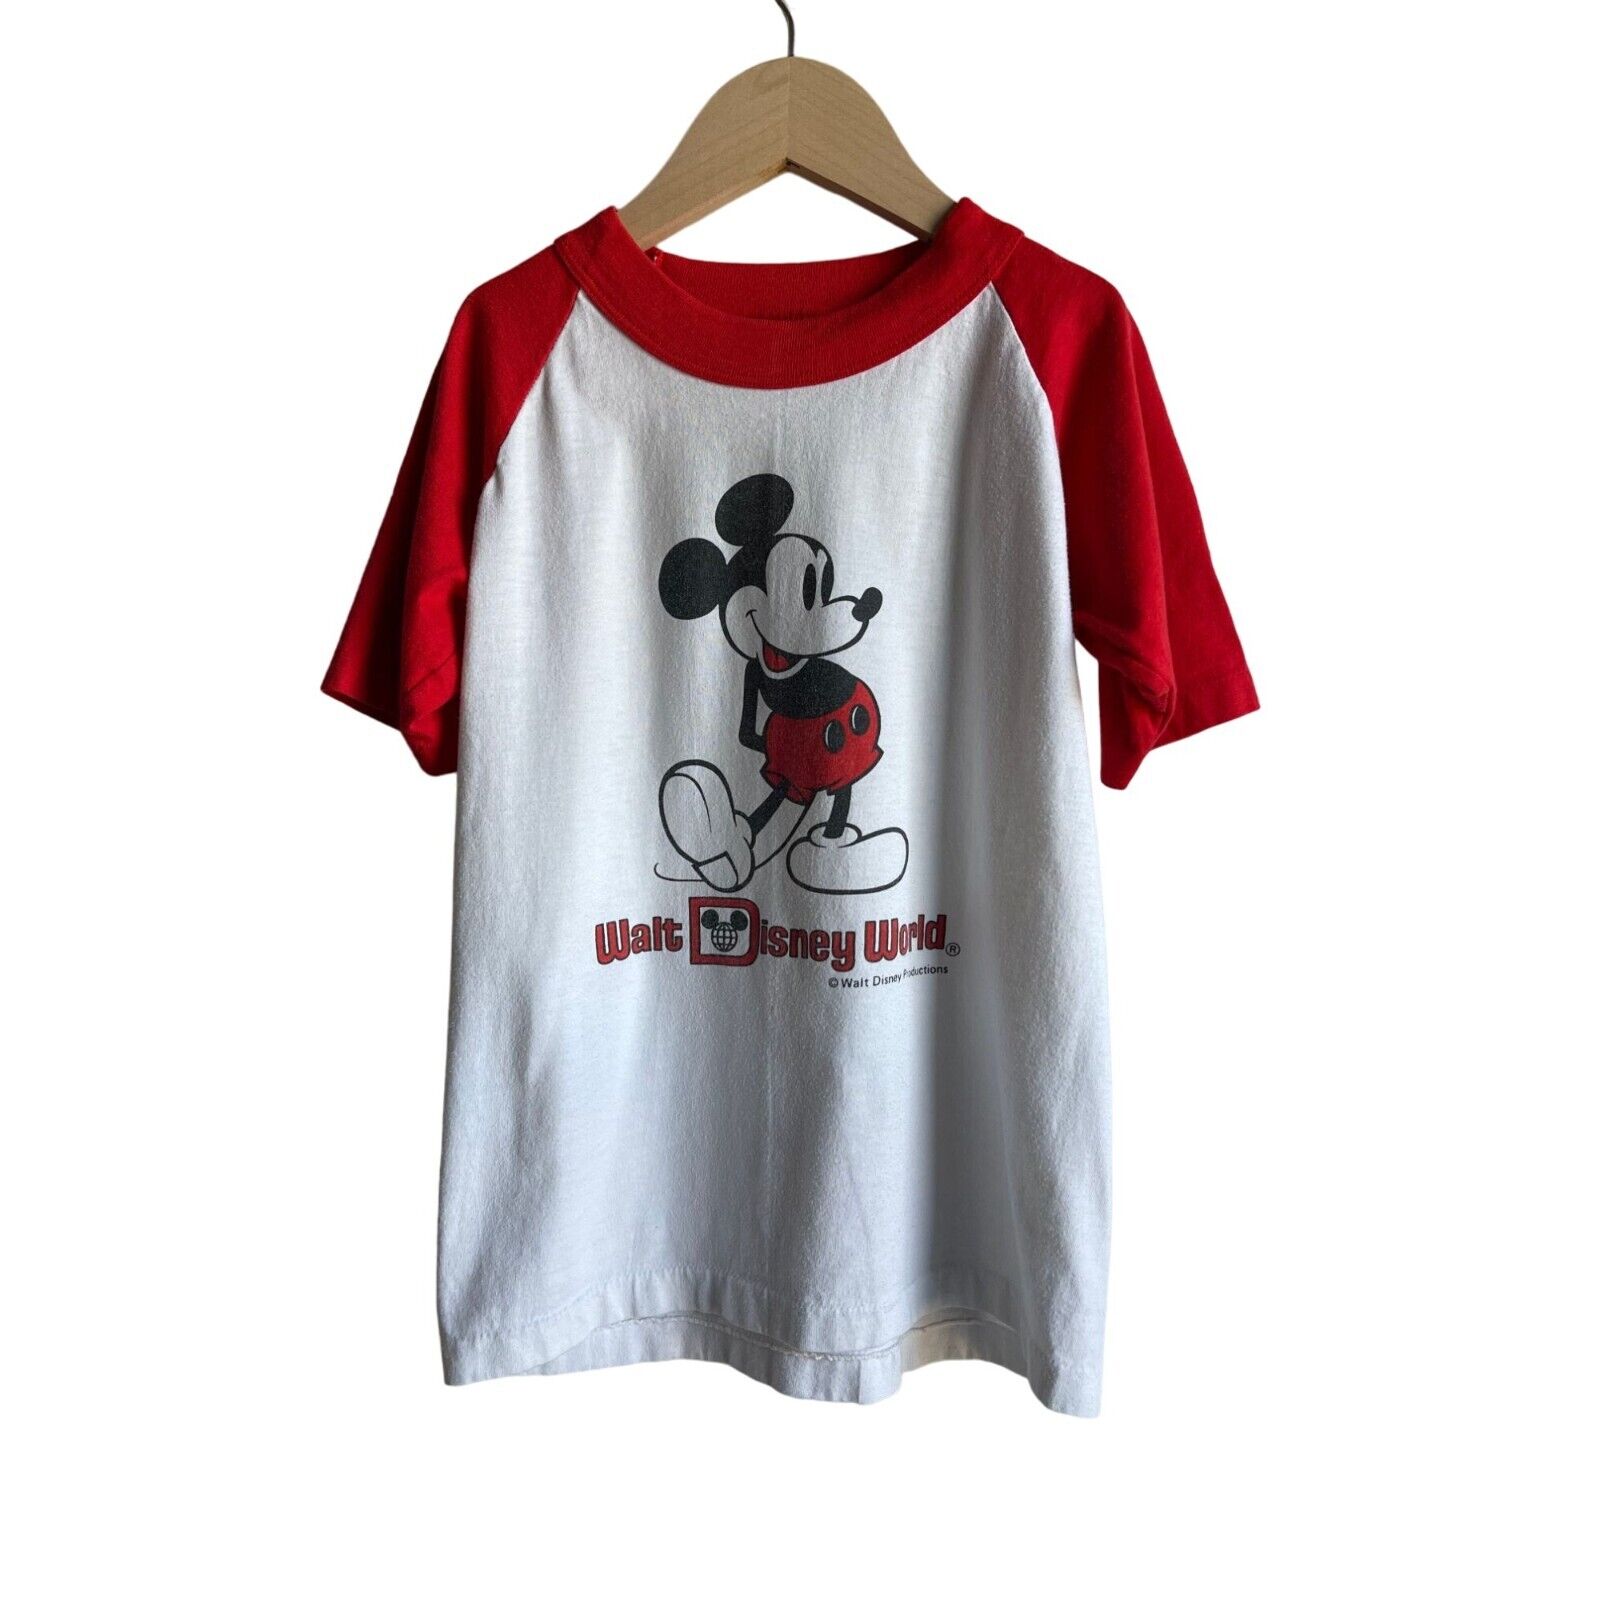 Vintage Disney World Mickey Mouse Made in USA Raglan T-Shirt Youth L 100% Cotton